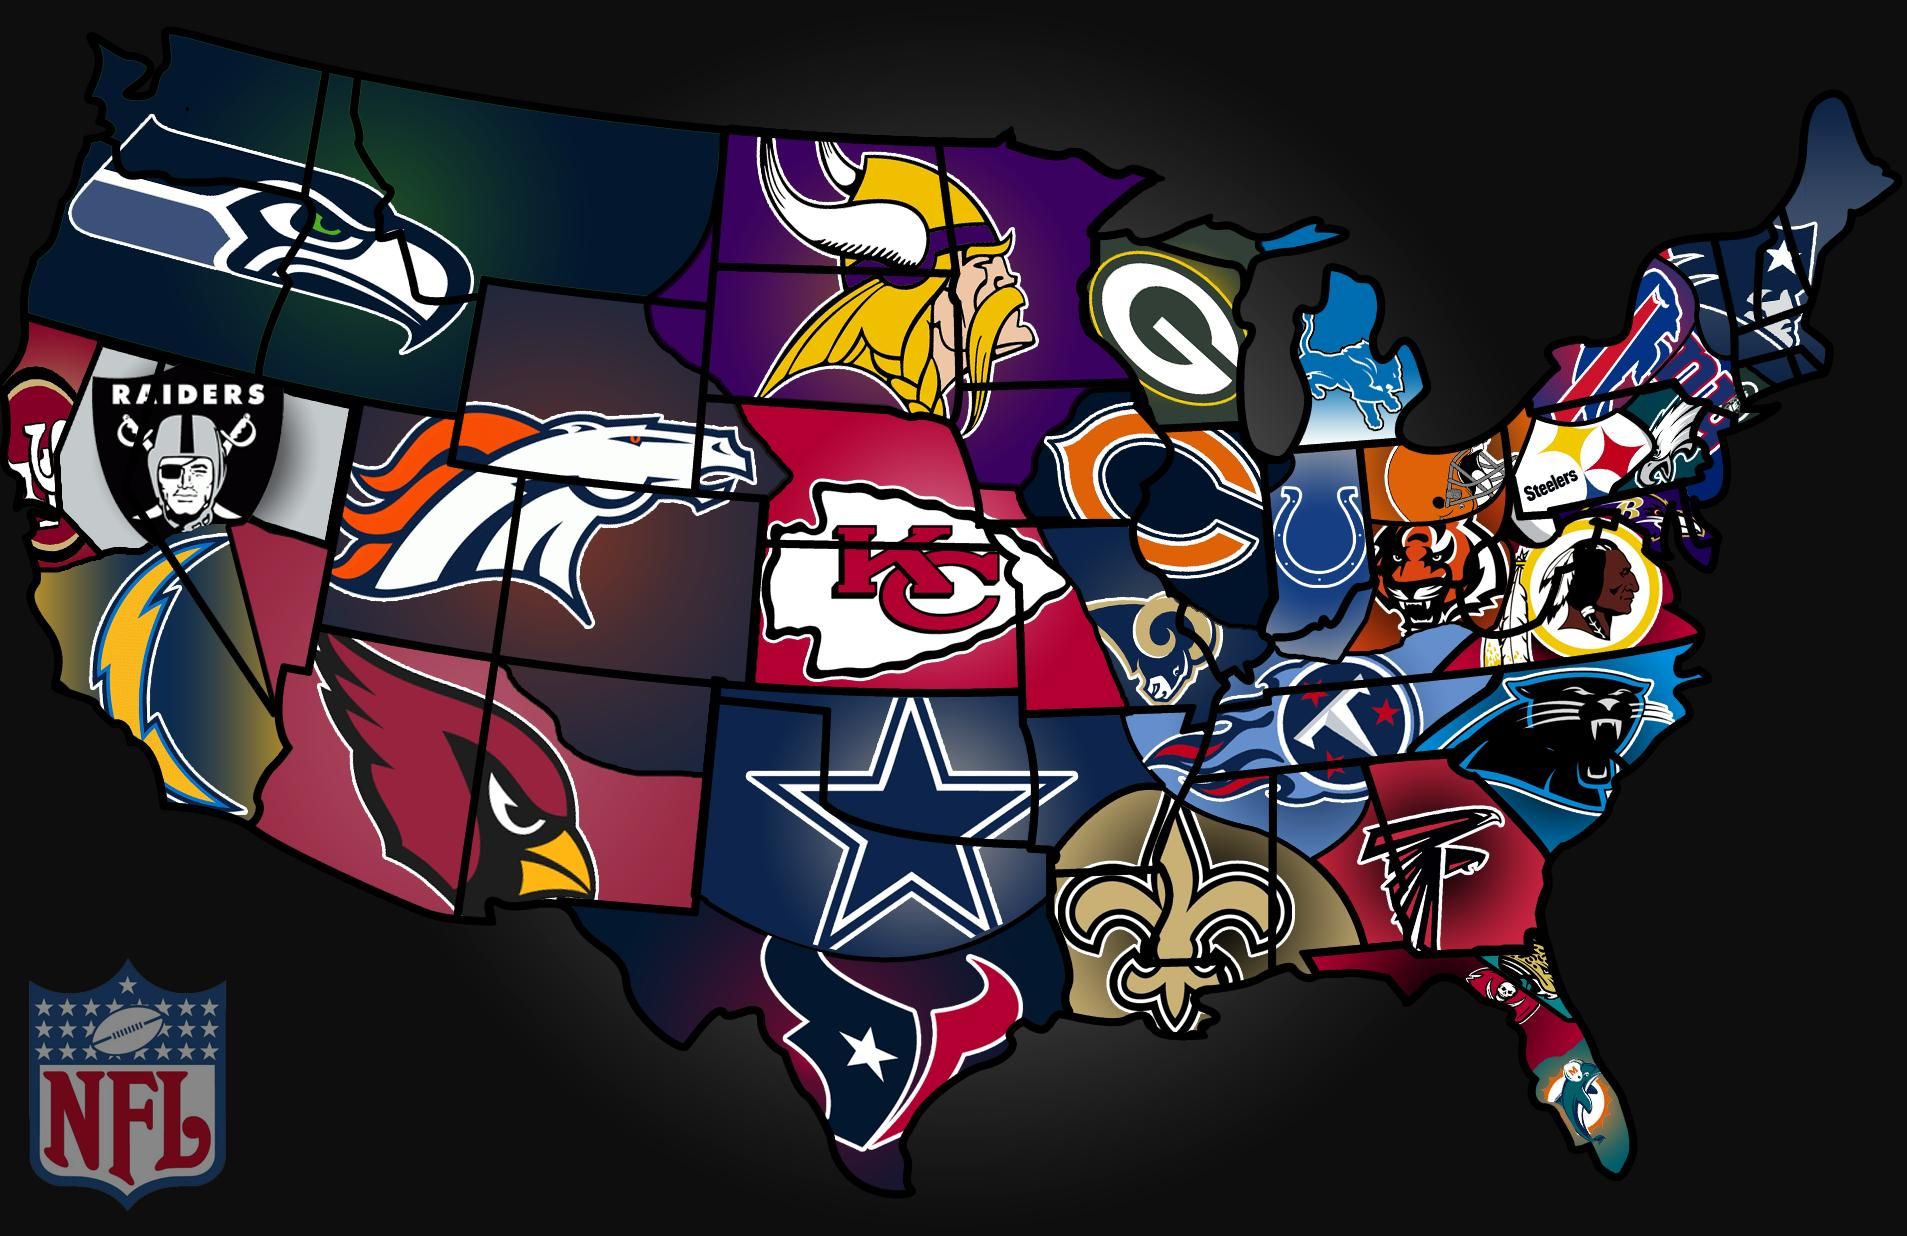 mapamerica. Nfl, Playoff picture, Team wallpaper